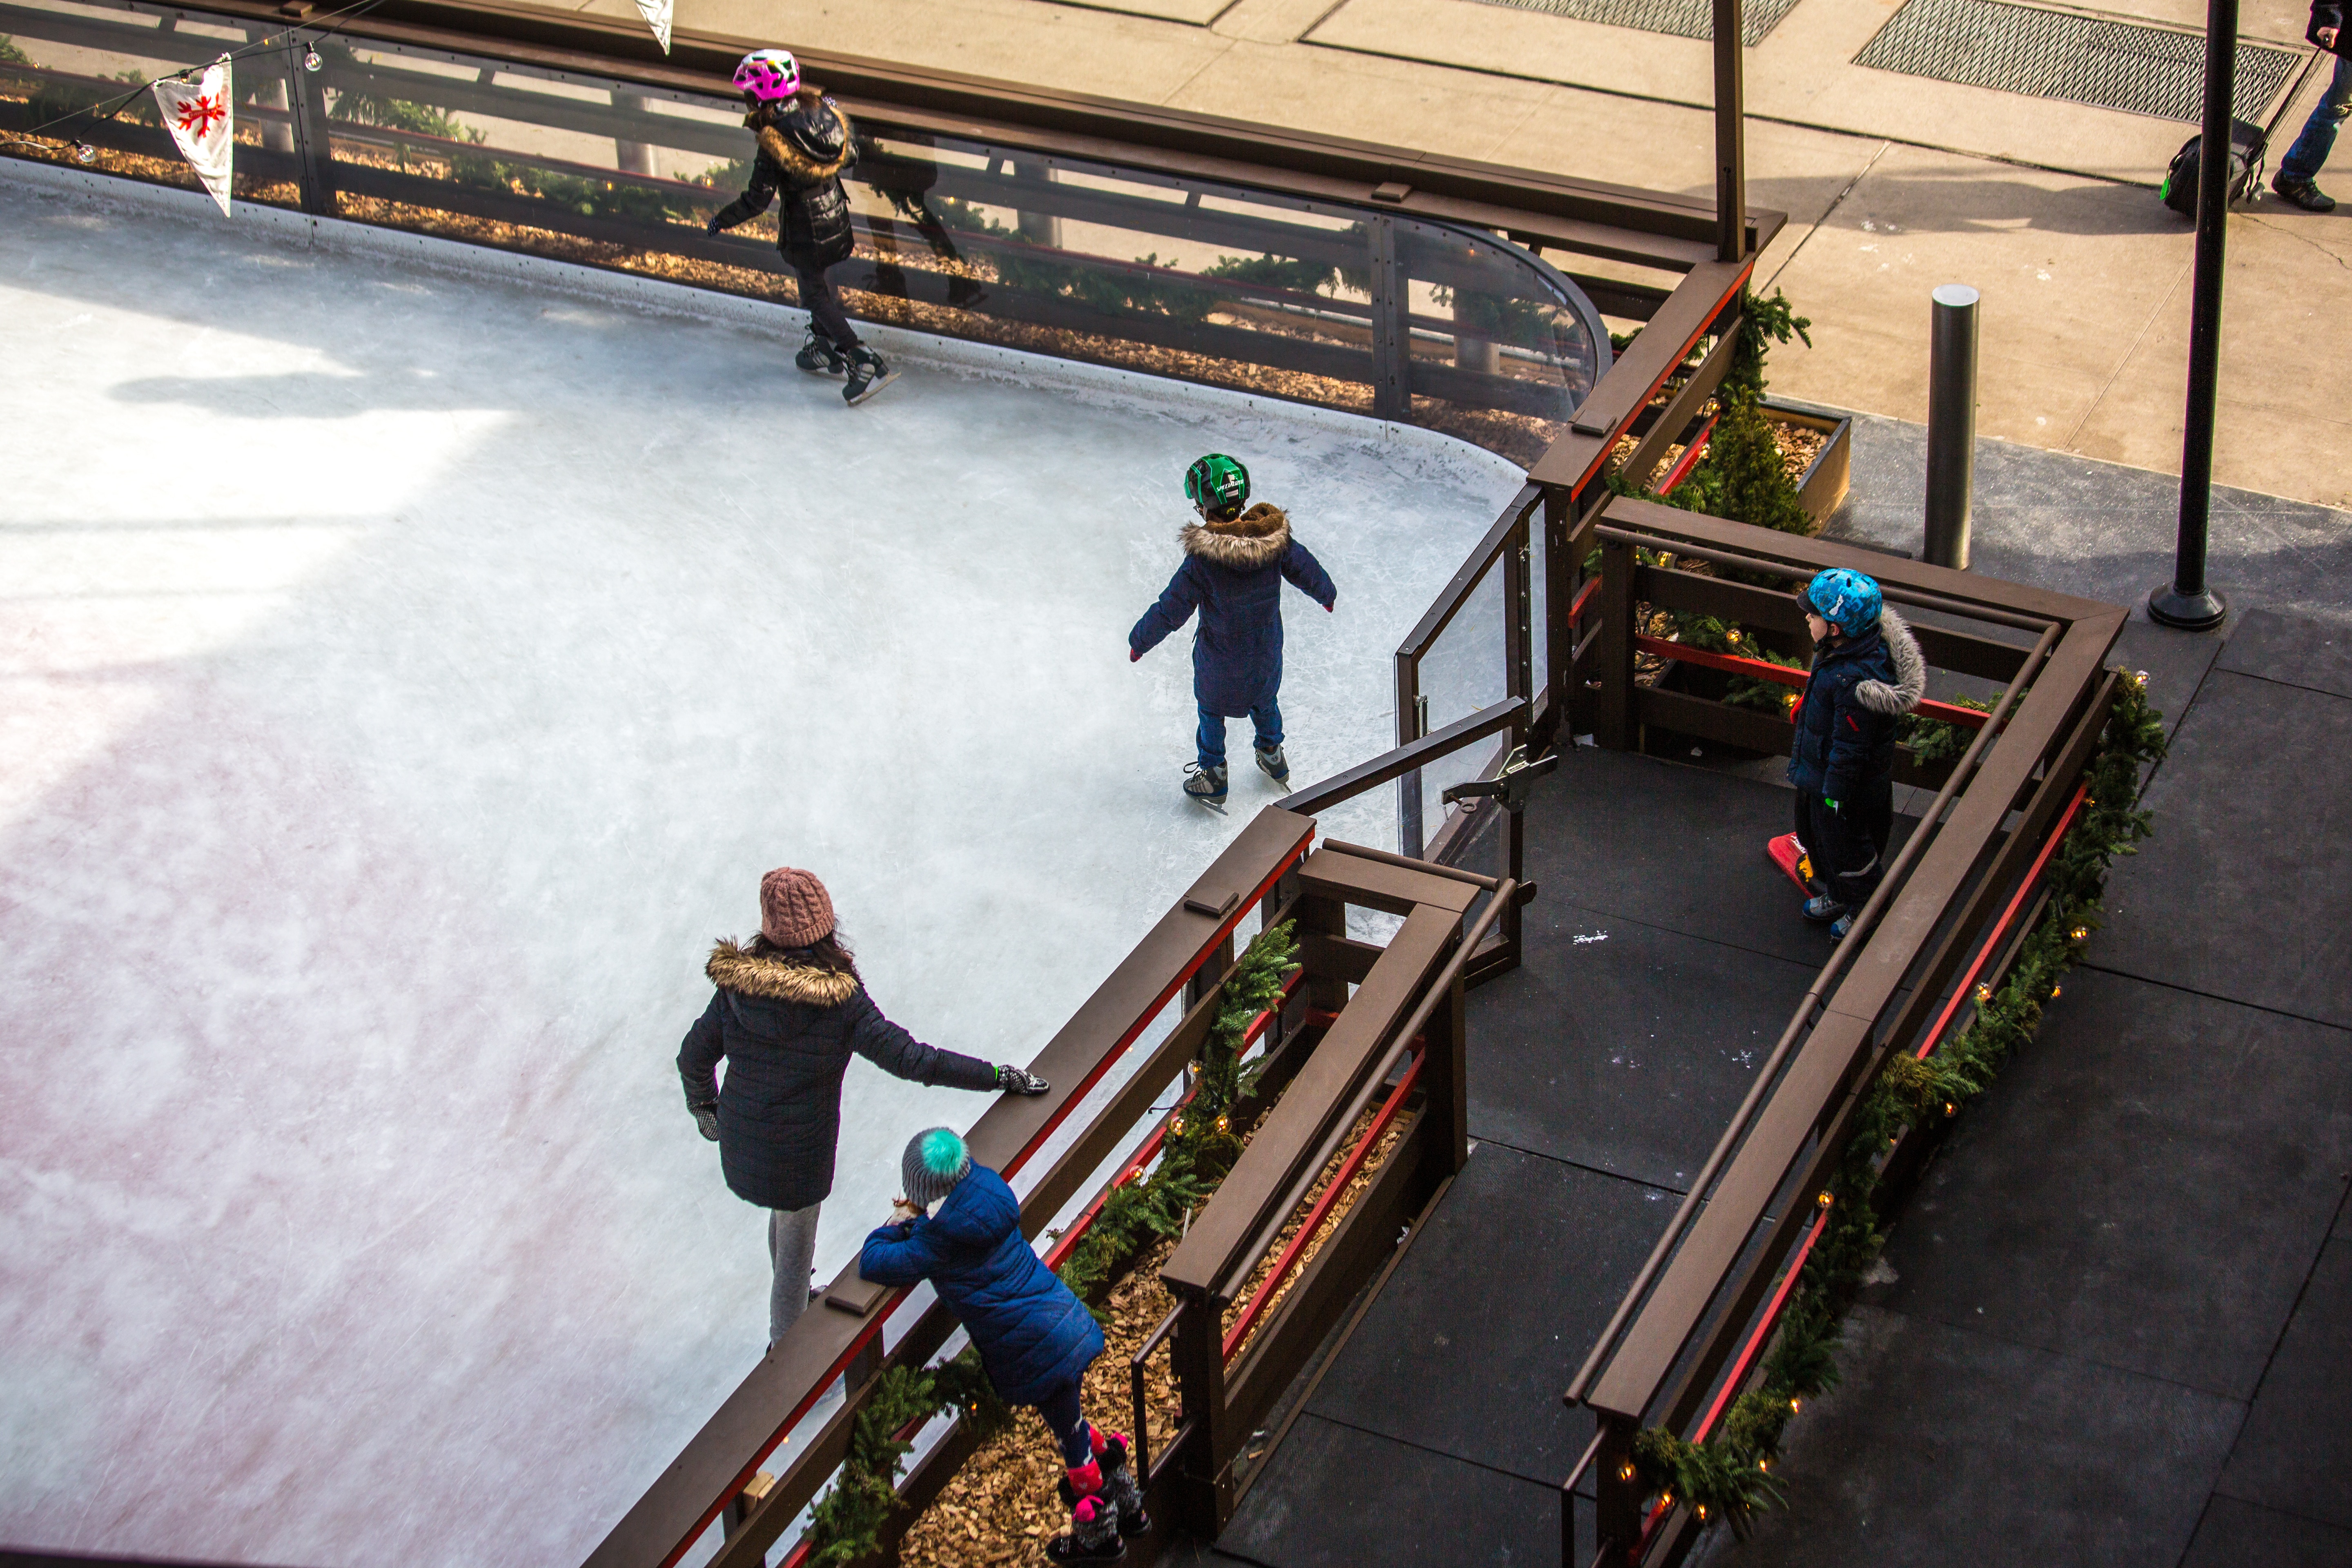 Winter Sports and Activities in the Triangle